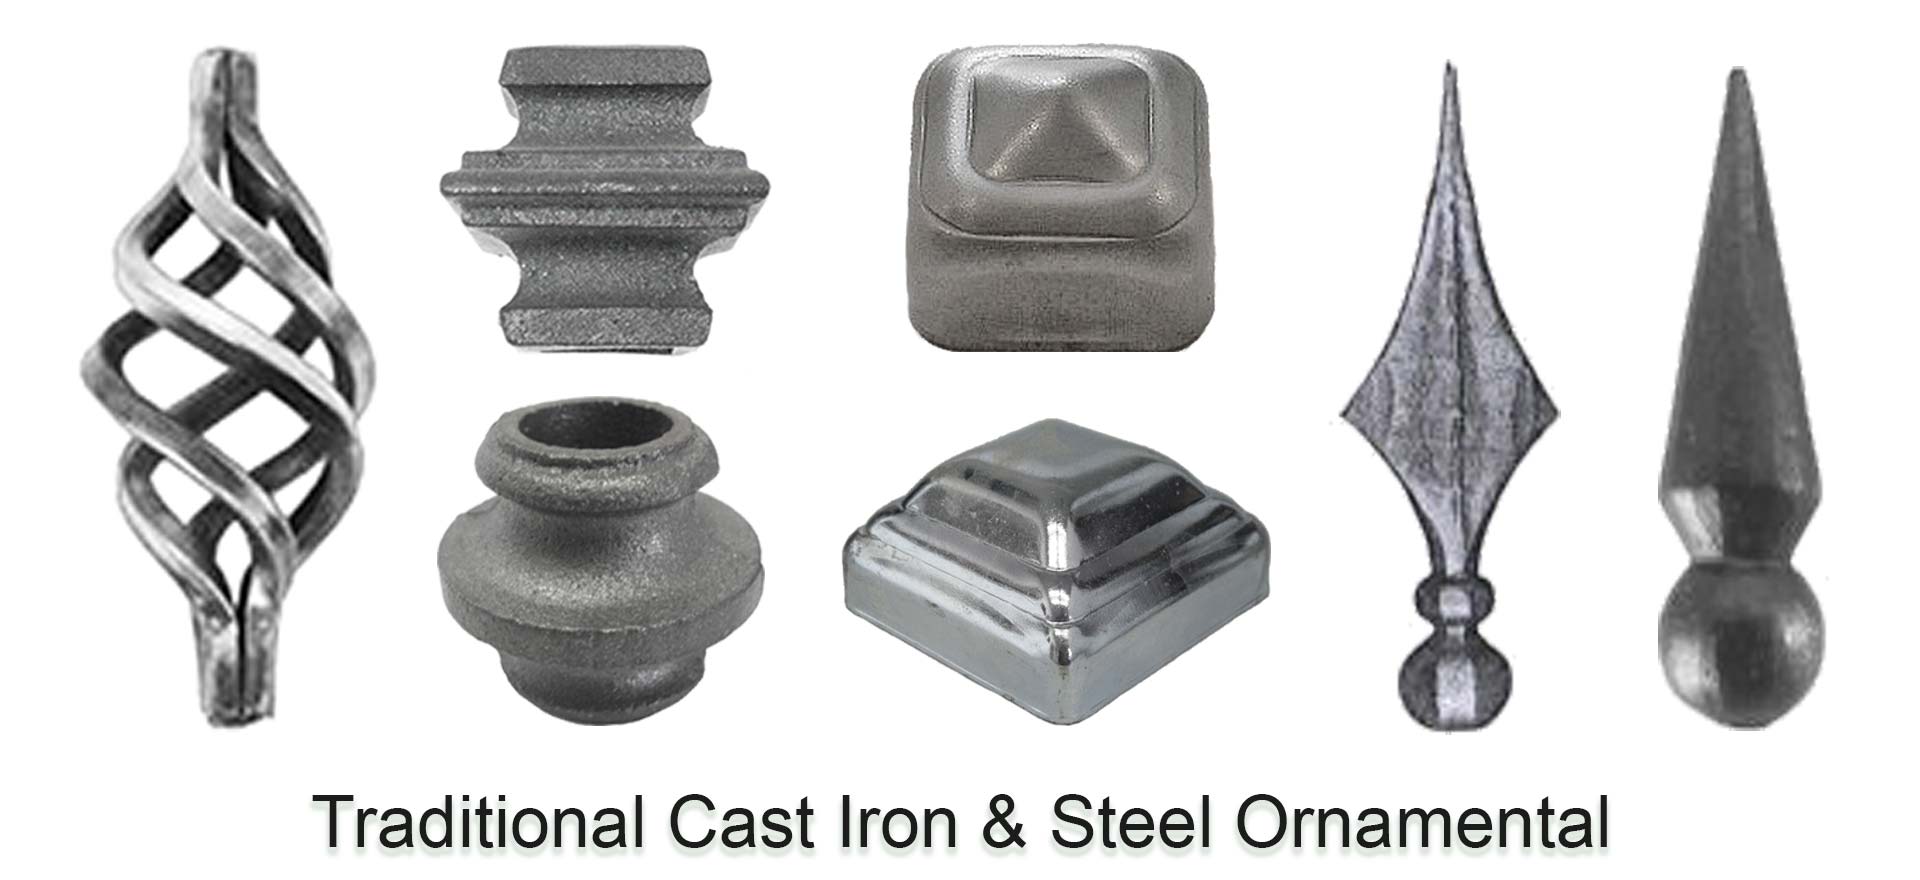 Wrought Iron Balls, Ornamental Decorative Post Caps, Collars and Knuckles, Cut Steel Designs, Custom Forged Wood, Door Hardware, Forged Steel Baskets, Leaves and Ornaments, Steels Rings, Rosettes, Spears and Finials. Wide variety and Excellent Quality from Superior Ornamental Supply.